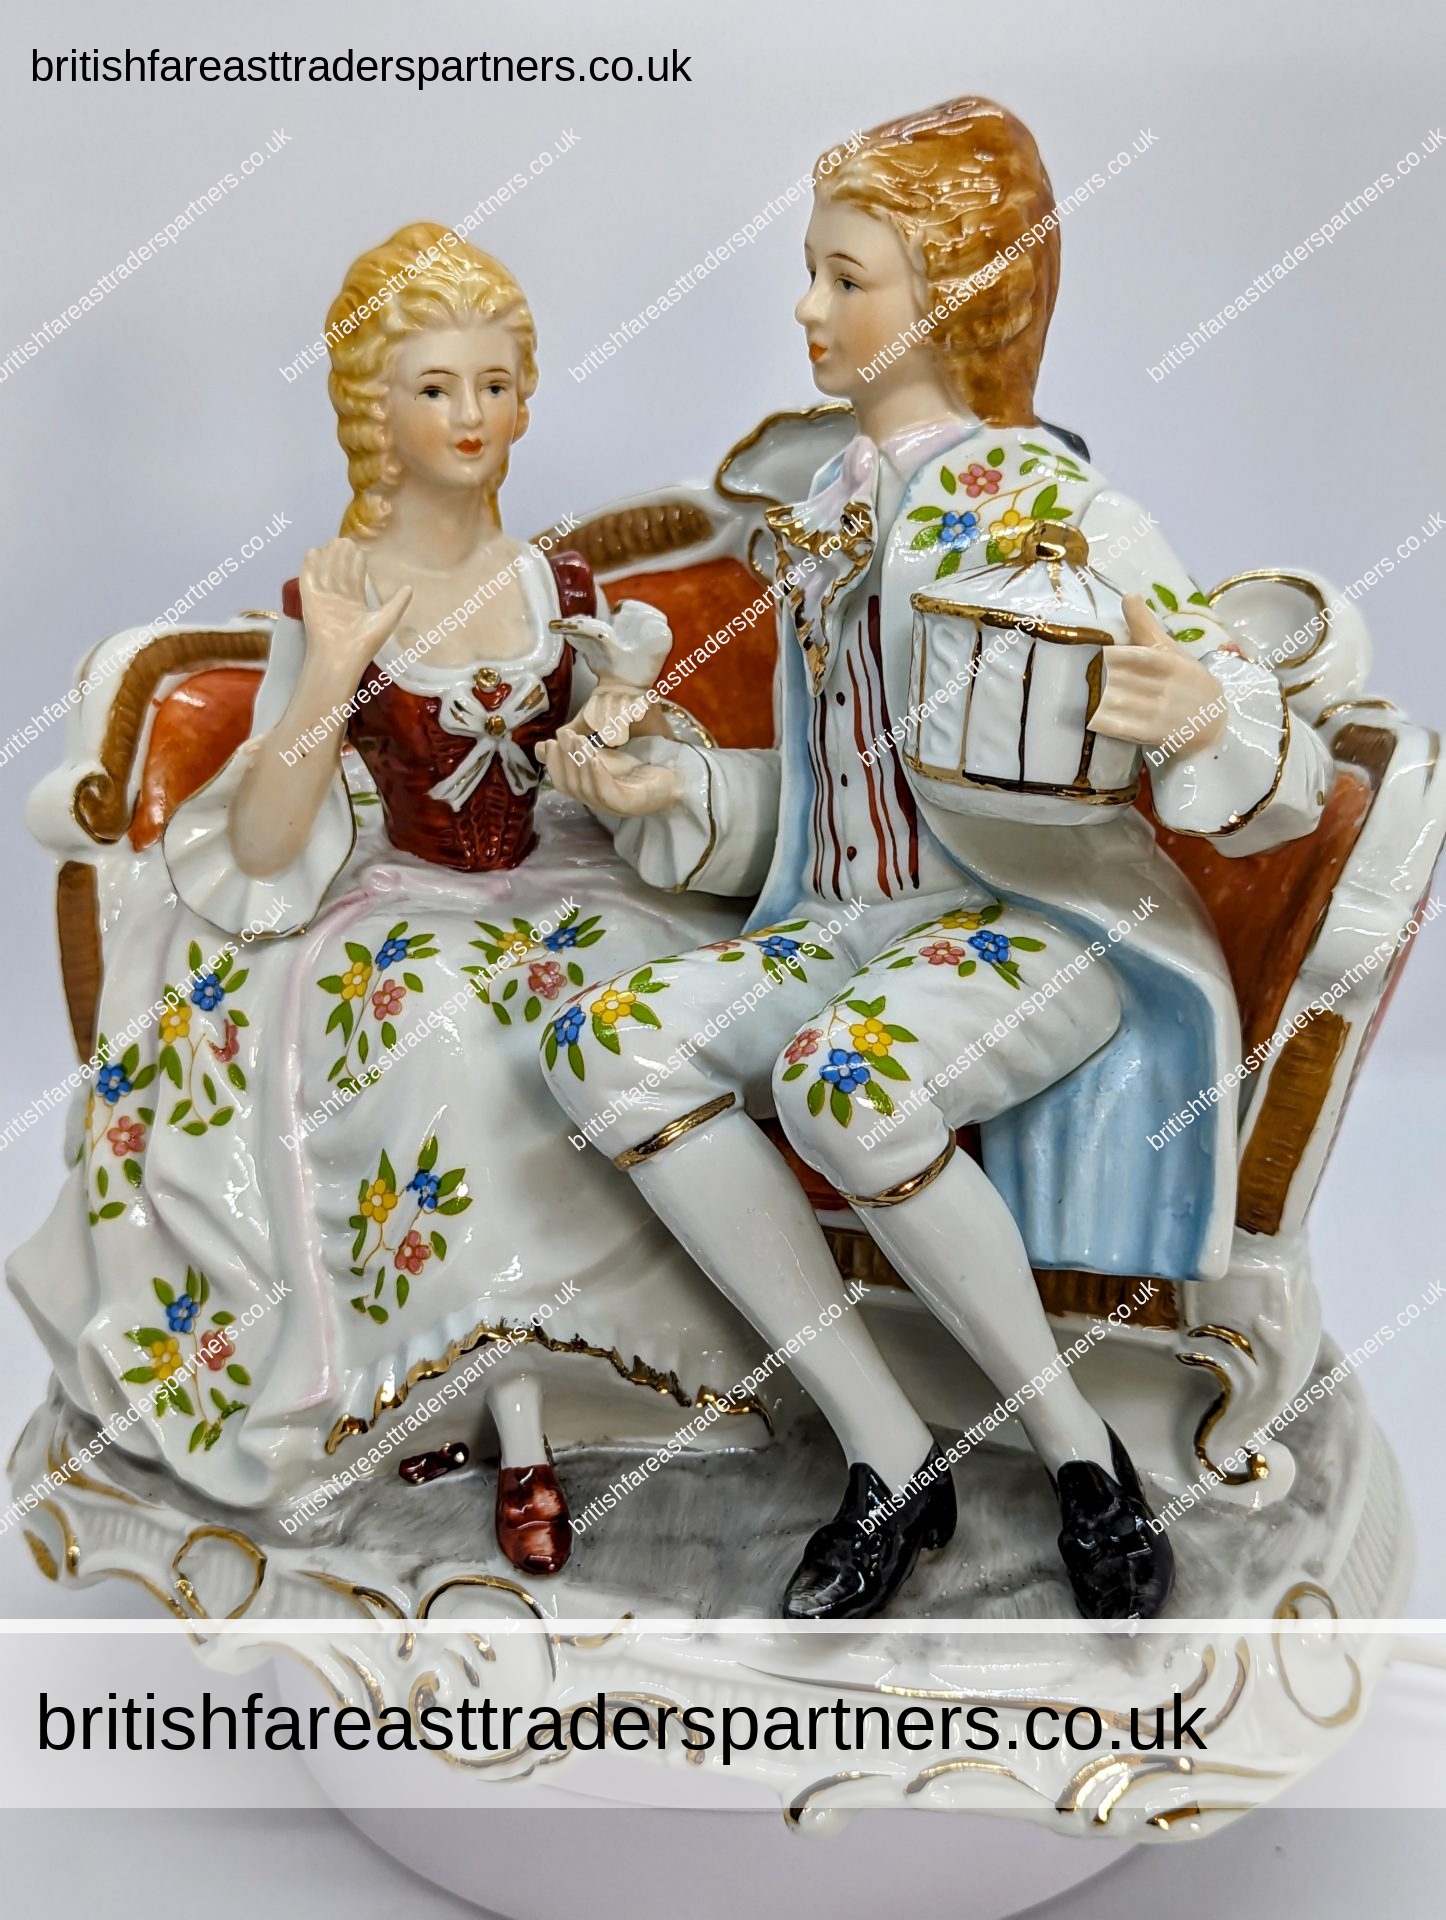 A Lovely GROUP of EUROPEAN CONTINENTAL “Courting Scene of a Couple” PORCELAIN FIGURINE